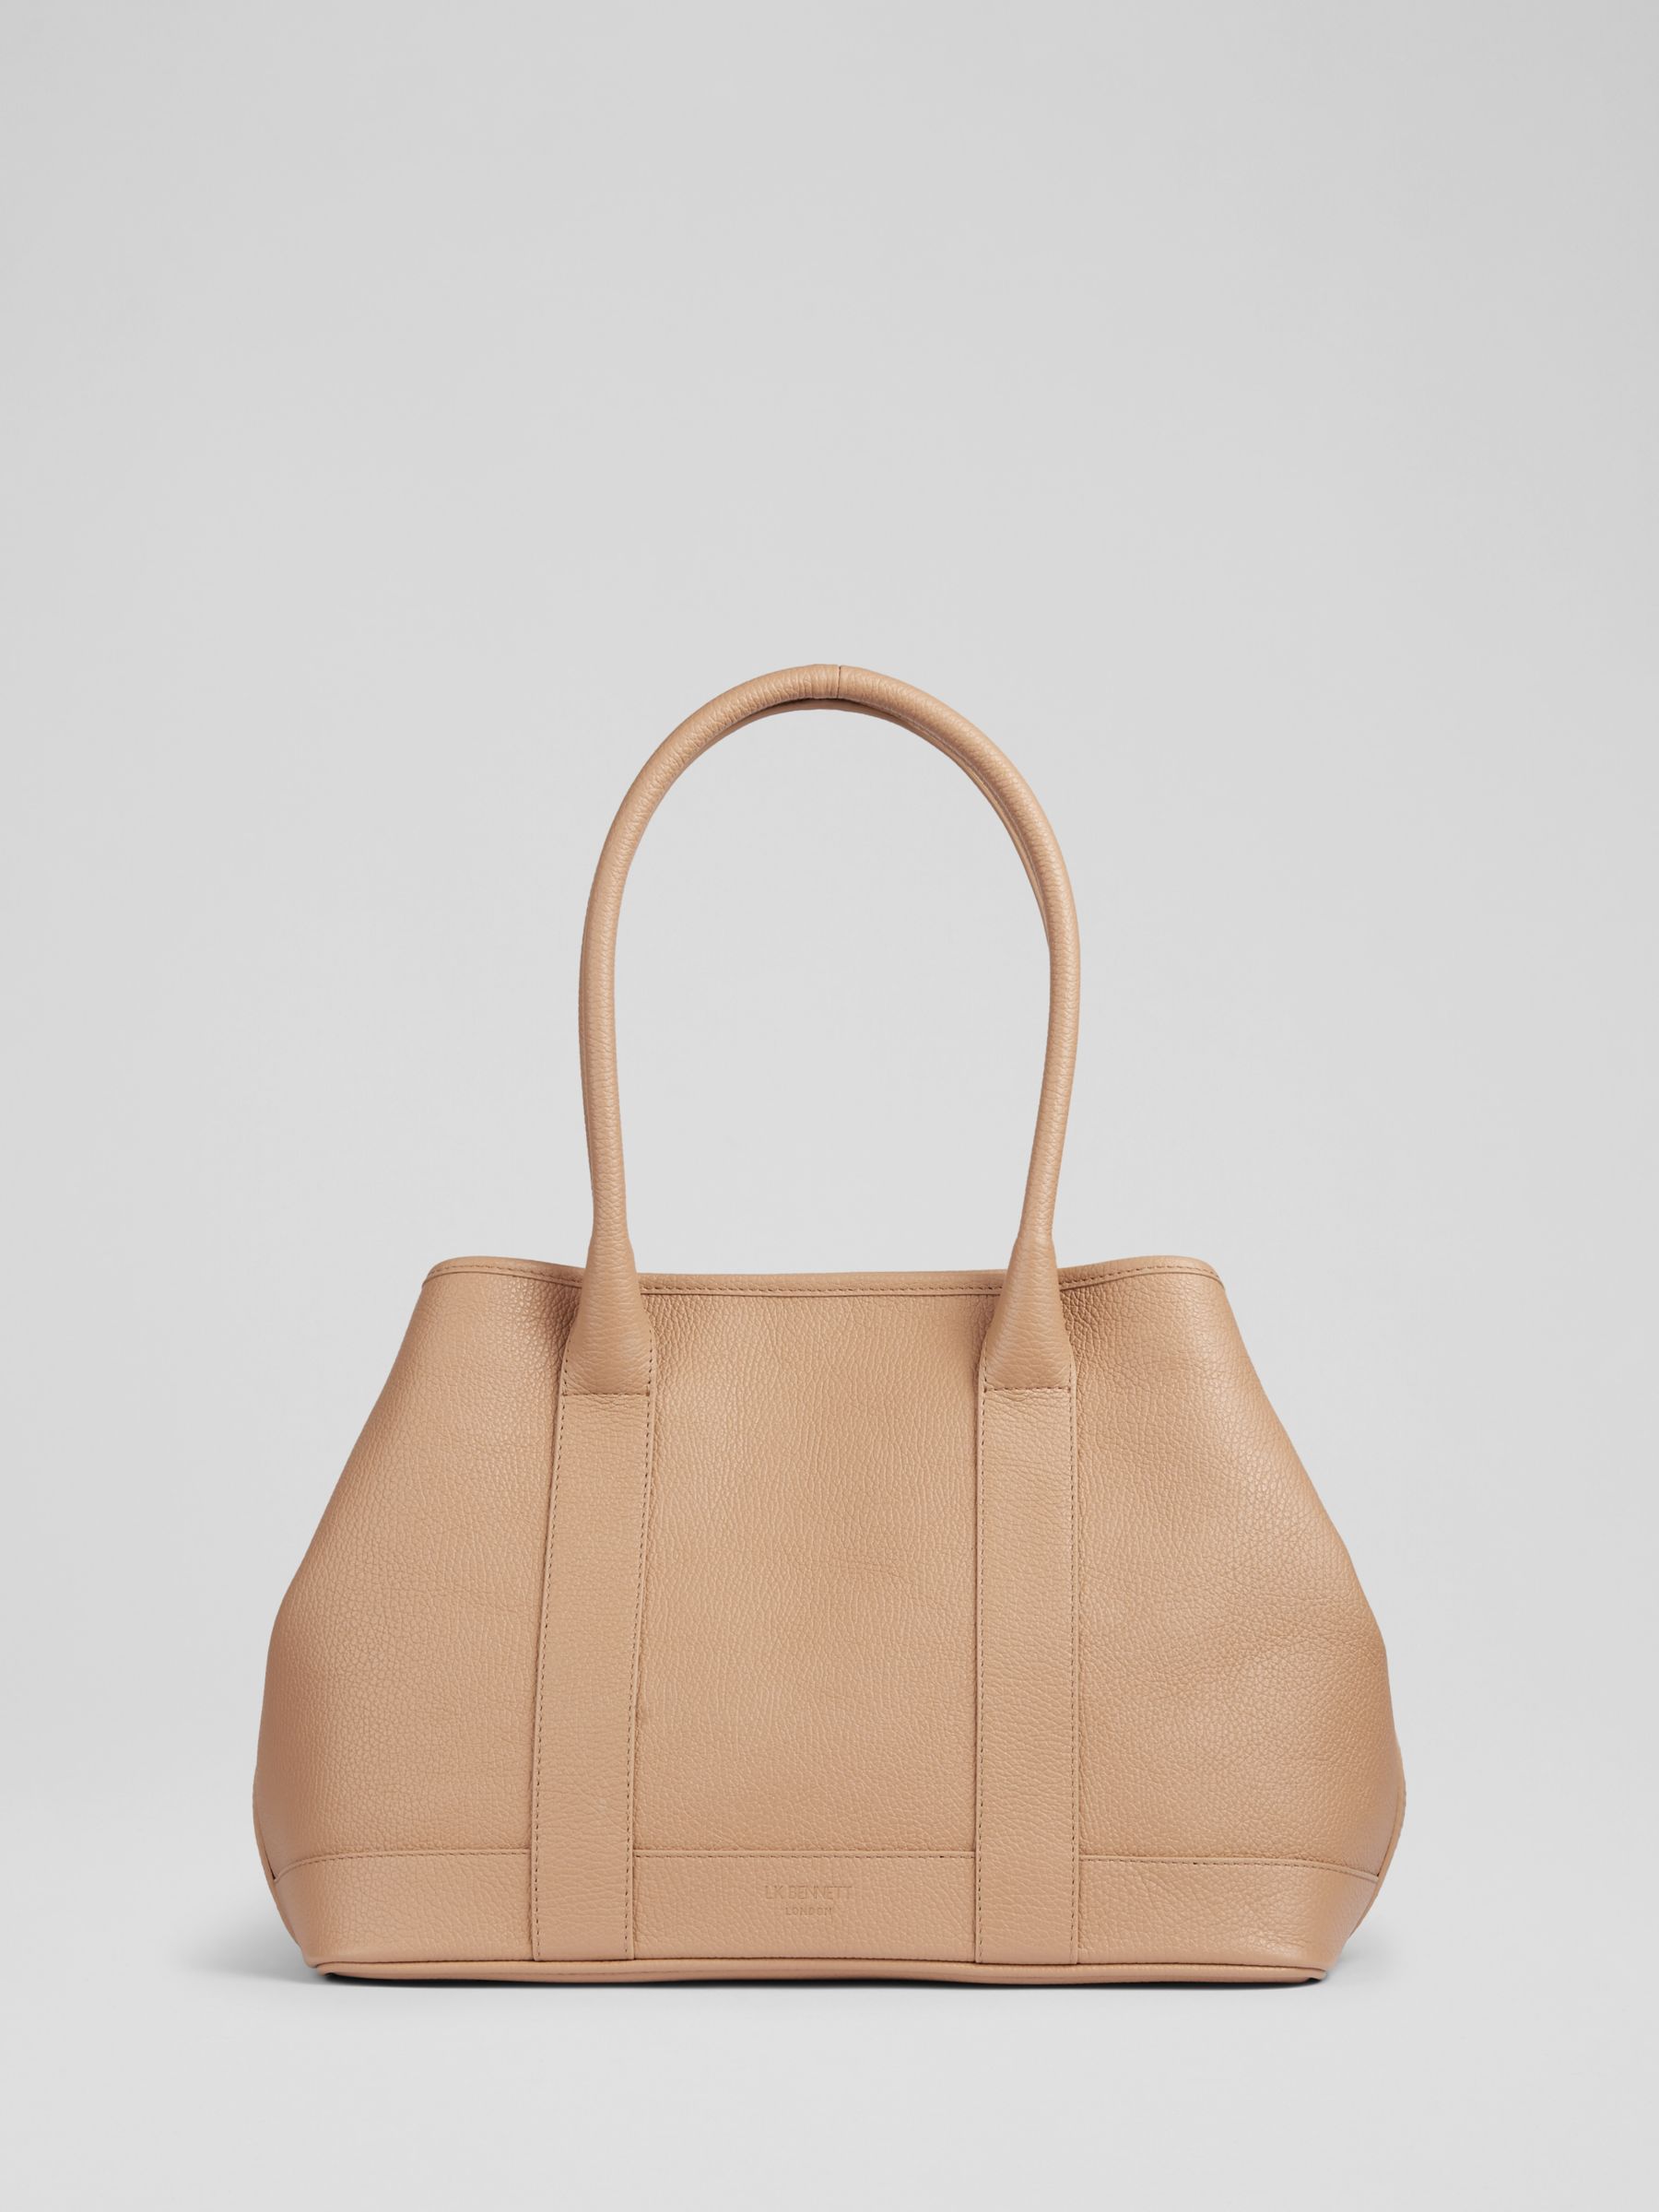 L.K.Bennett Laurie Leather Tote Bag, Camel, One Size